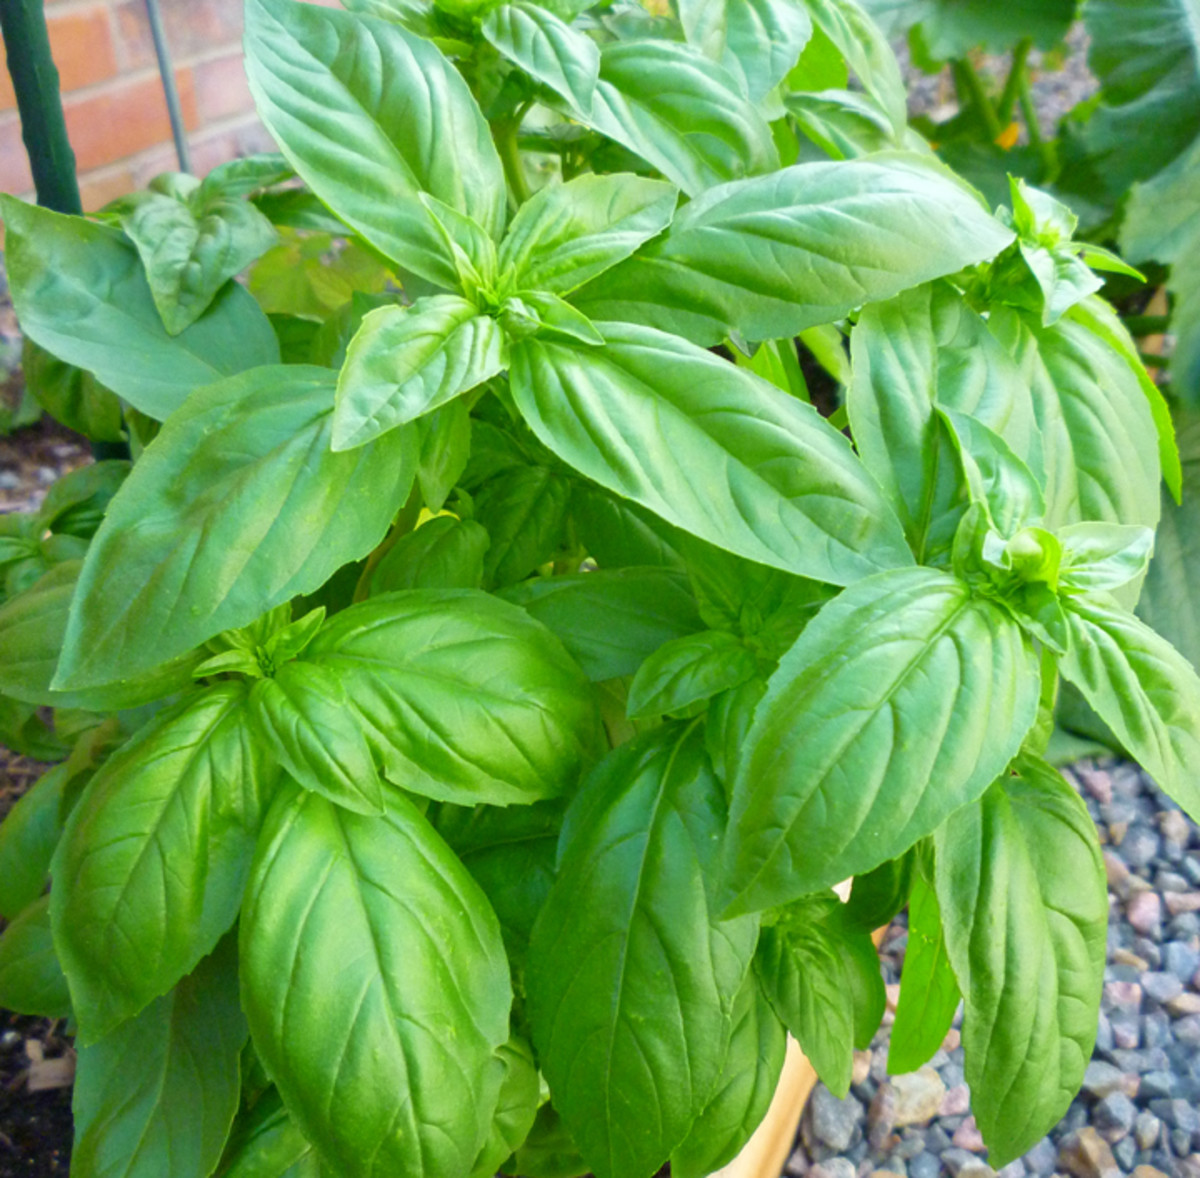 How to Care for Sweet Basil